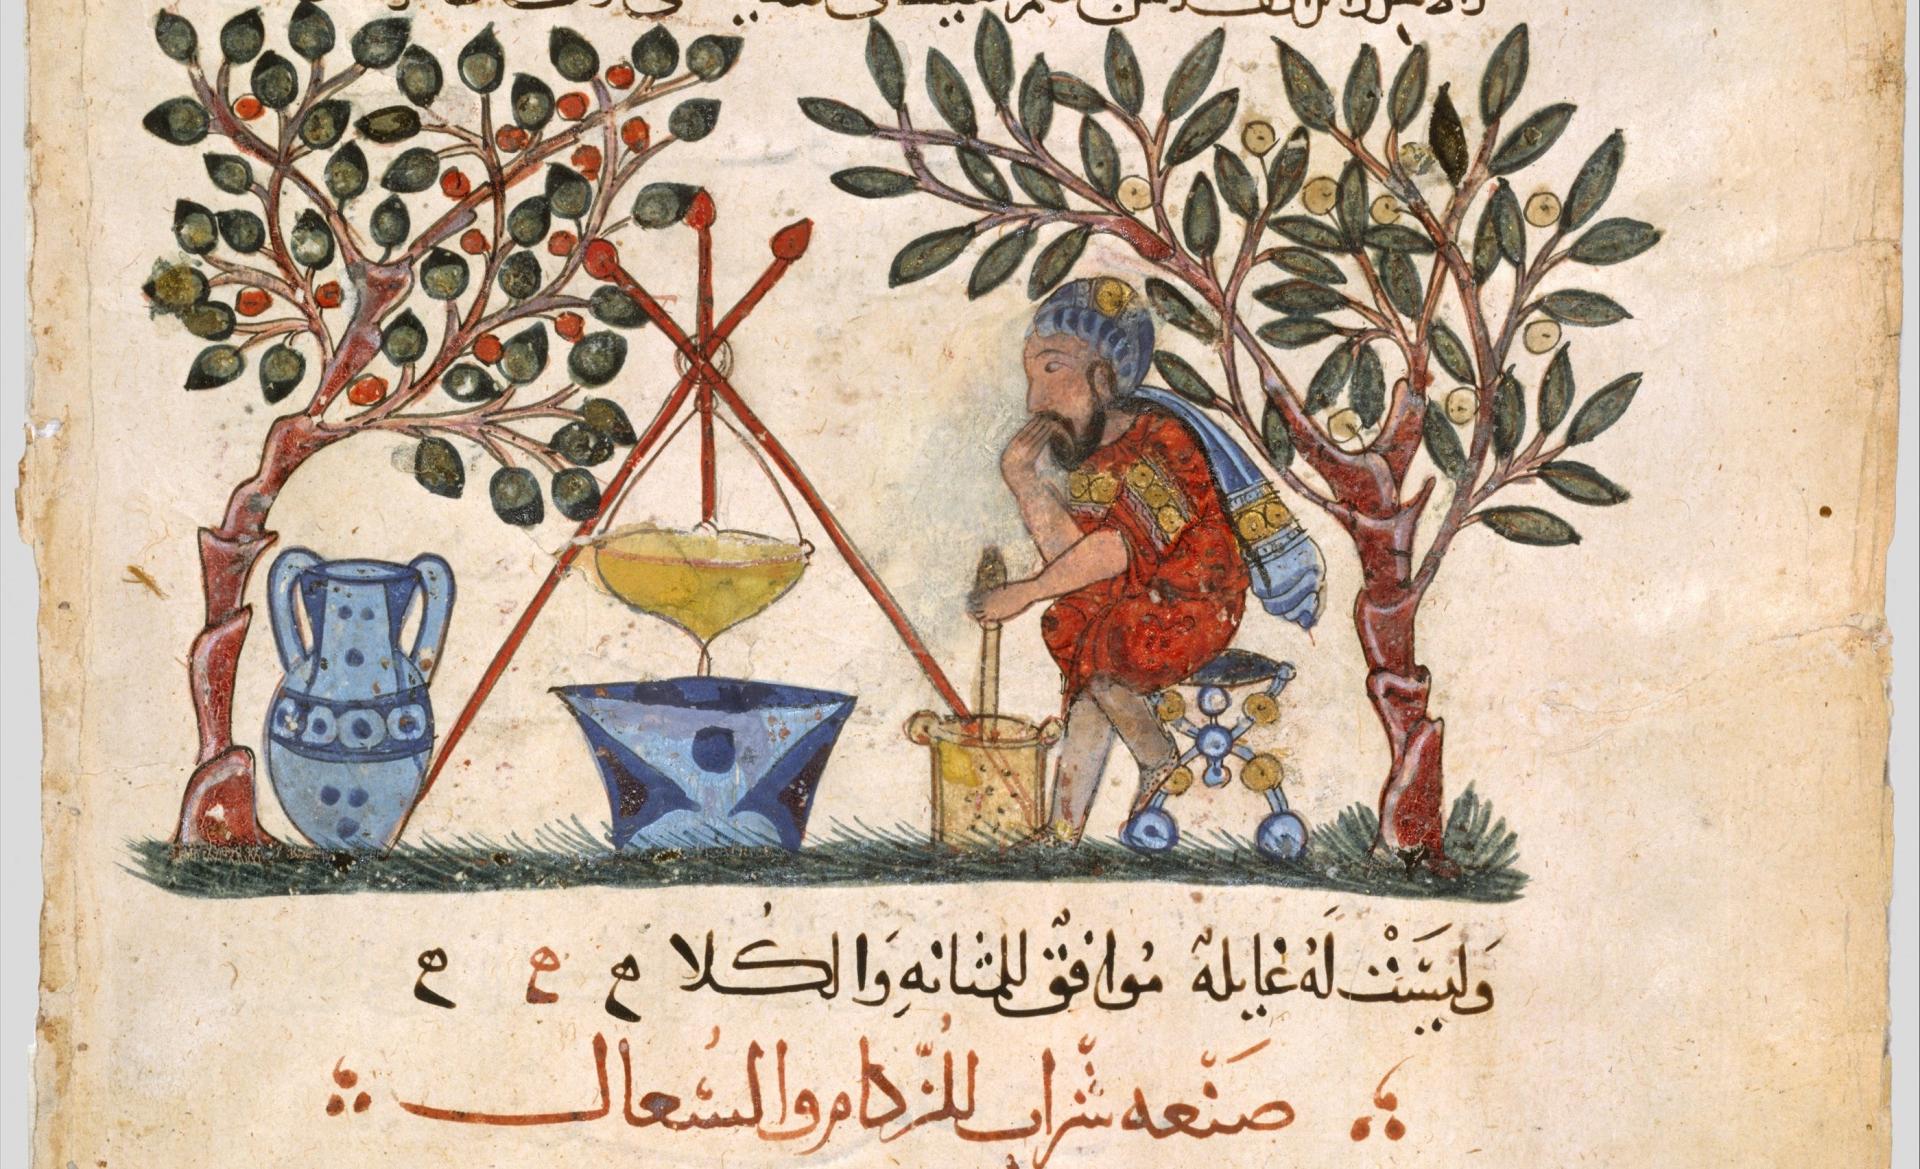 "Physician Preparing an Elixir", illustration accompanied by a recipe for treating colds and coughs from Dioscorides' Materia Medica, dated 621 AH/1224 CE.